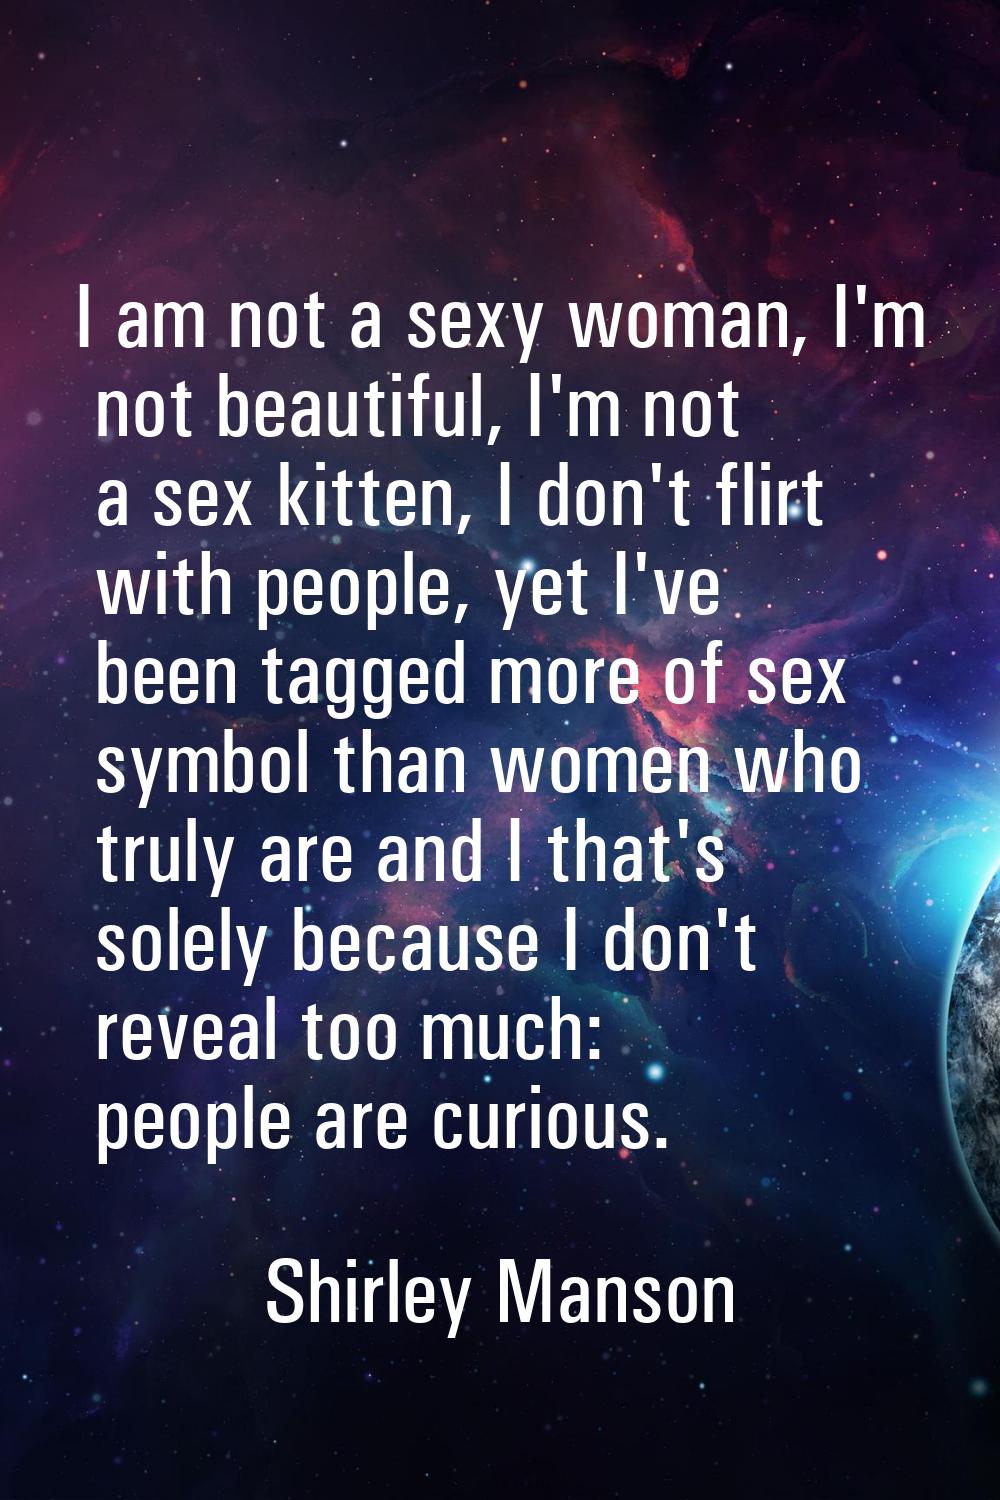 I am not a sexy woman, I'm not beautiful, I'm not a sex kitten, I don't flirt with people, yet I've